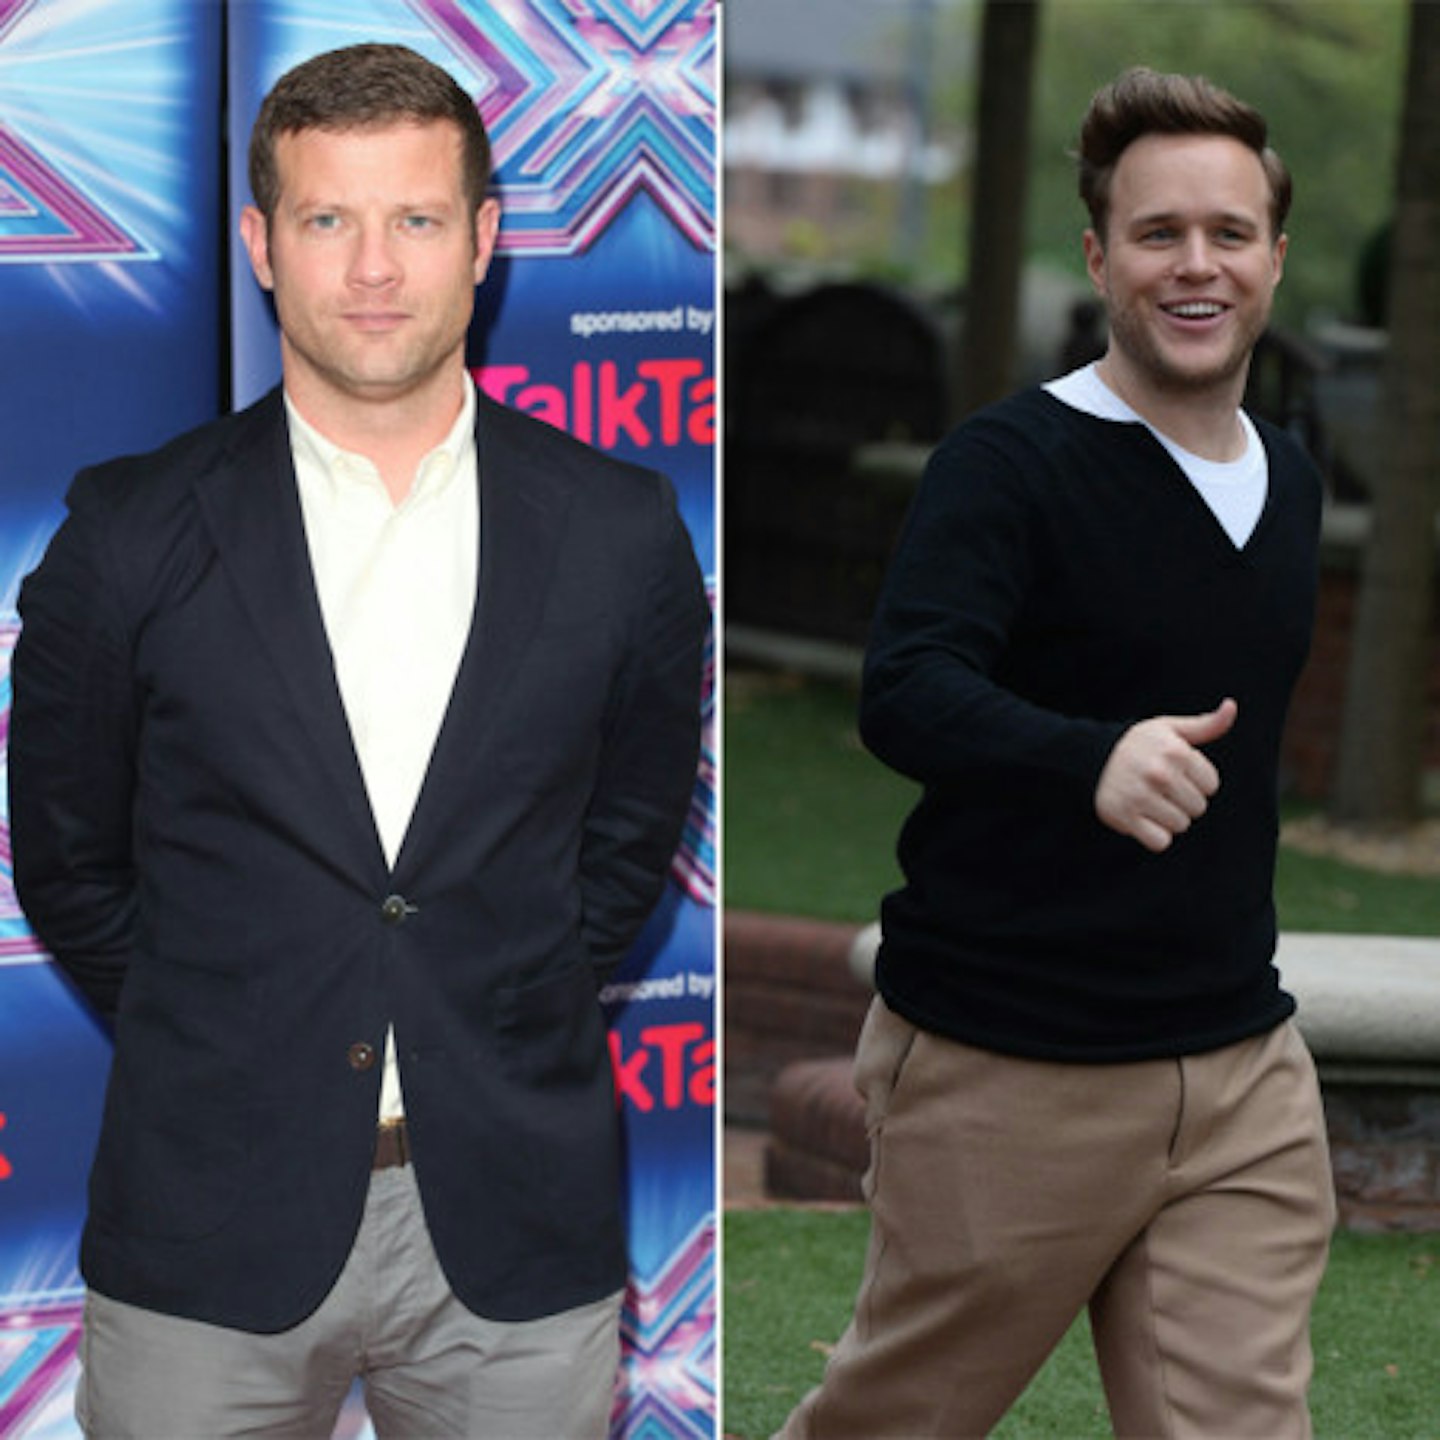 Dermot is out and Olly is heavily rumoured to be in